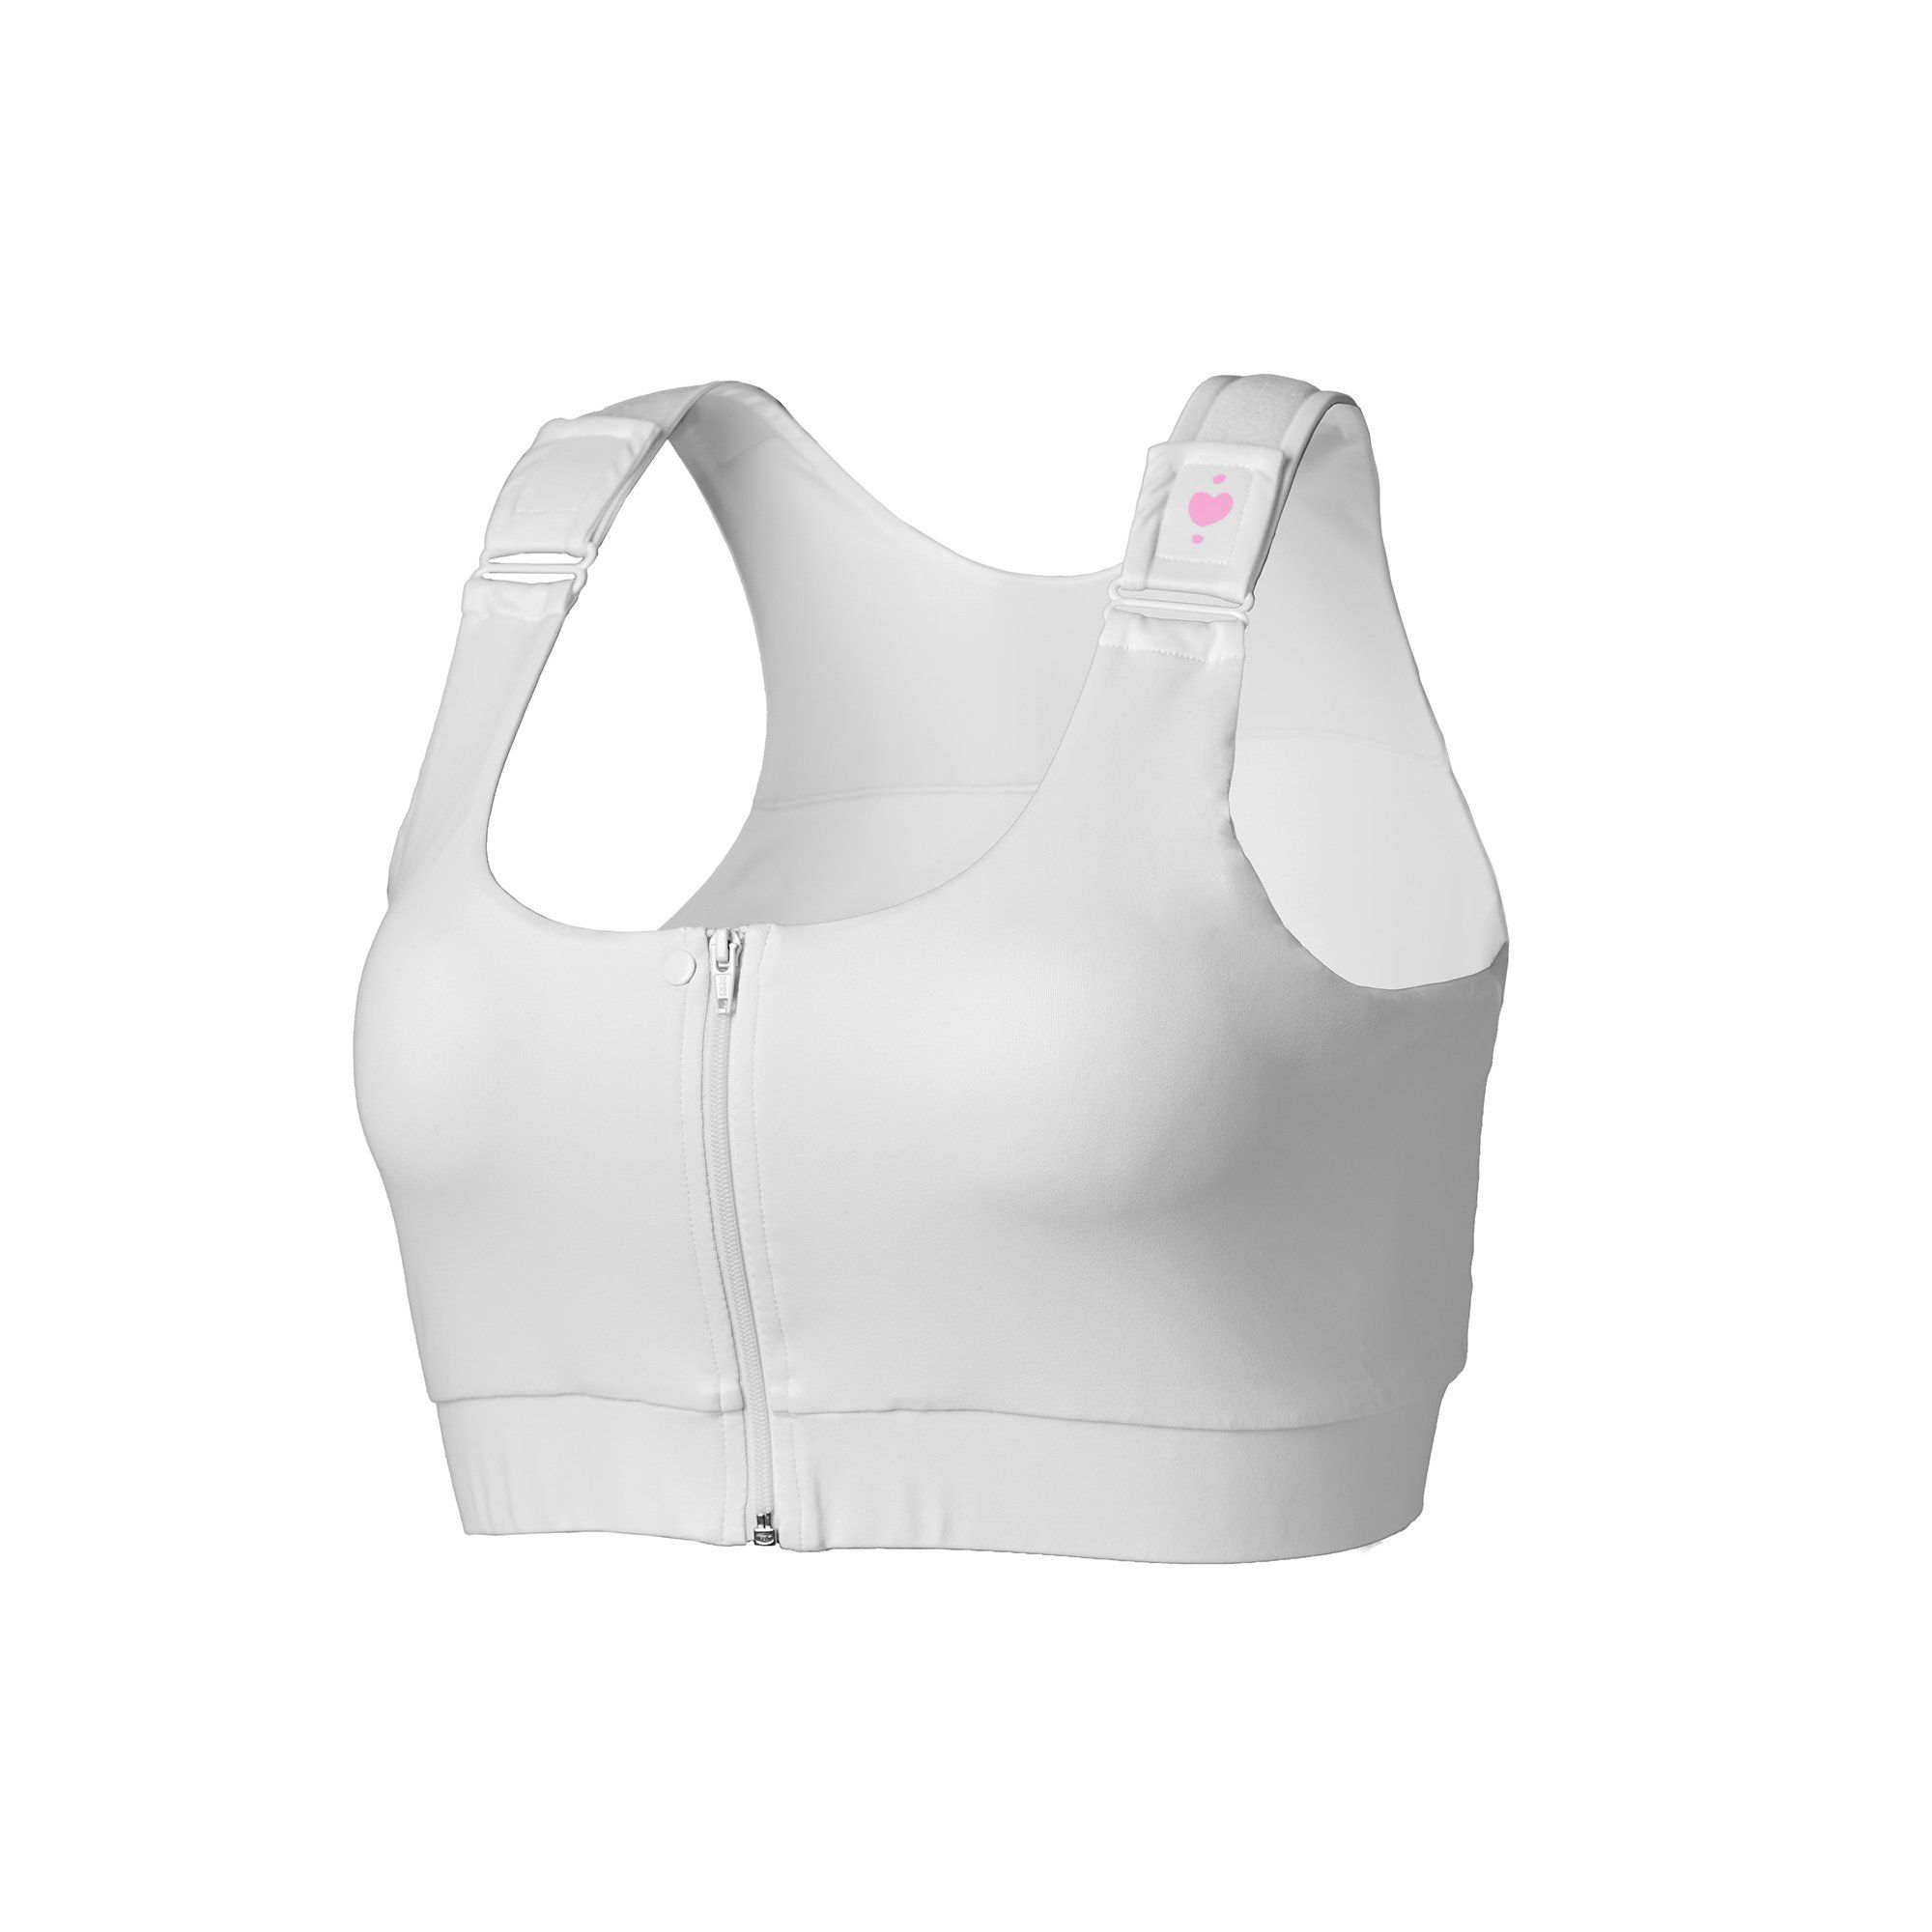 Heart & Core Shirl Post Surgical Bra, White - Large